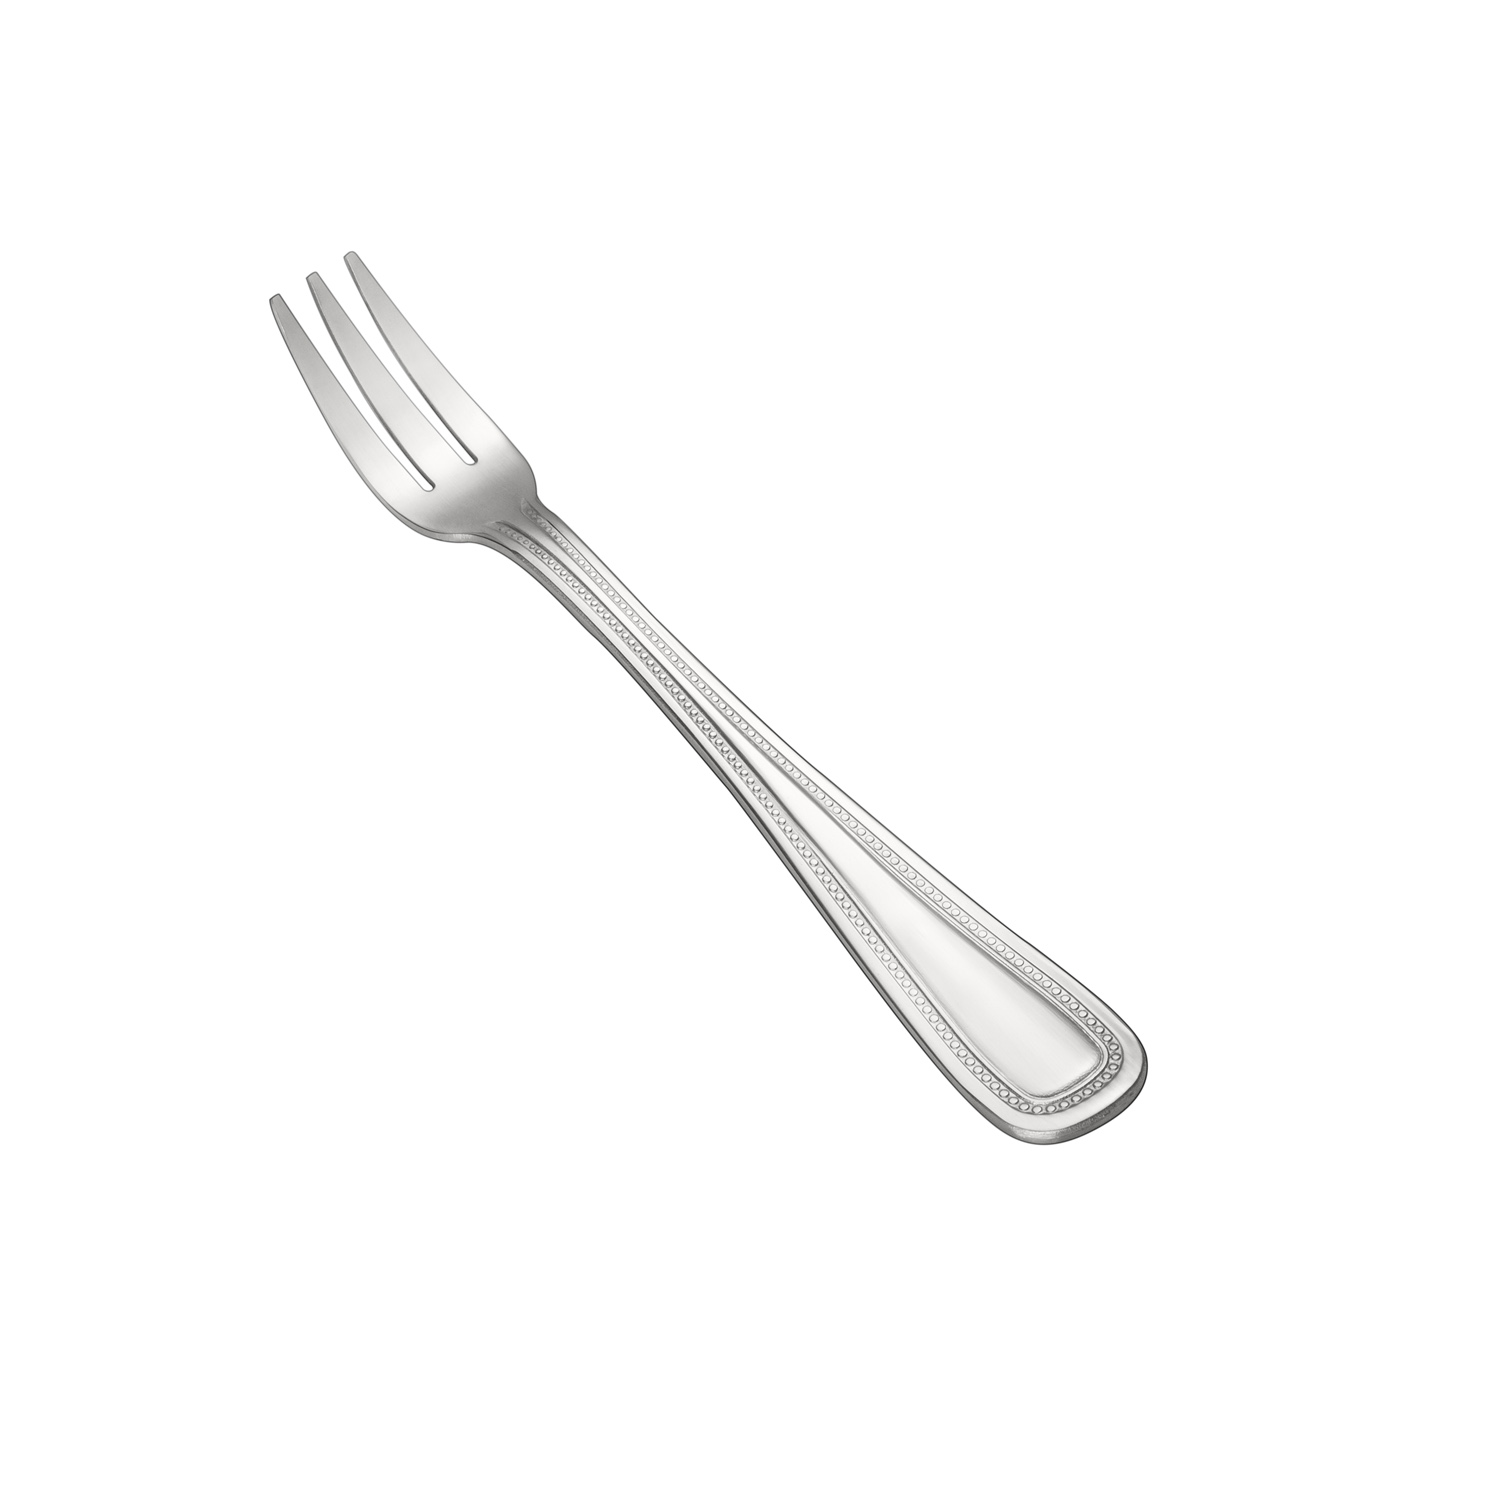 CAC China 3008-07 Black Pearl Oyster Fork, Heavyweight 18/0, 5 5/8"